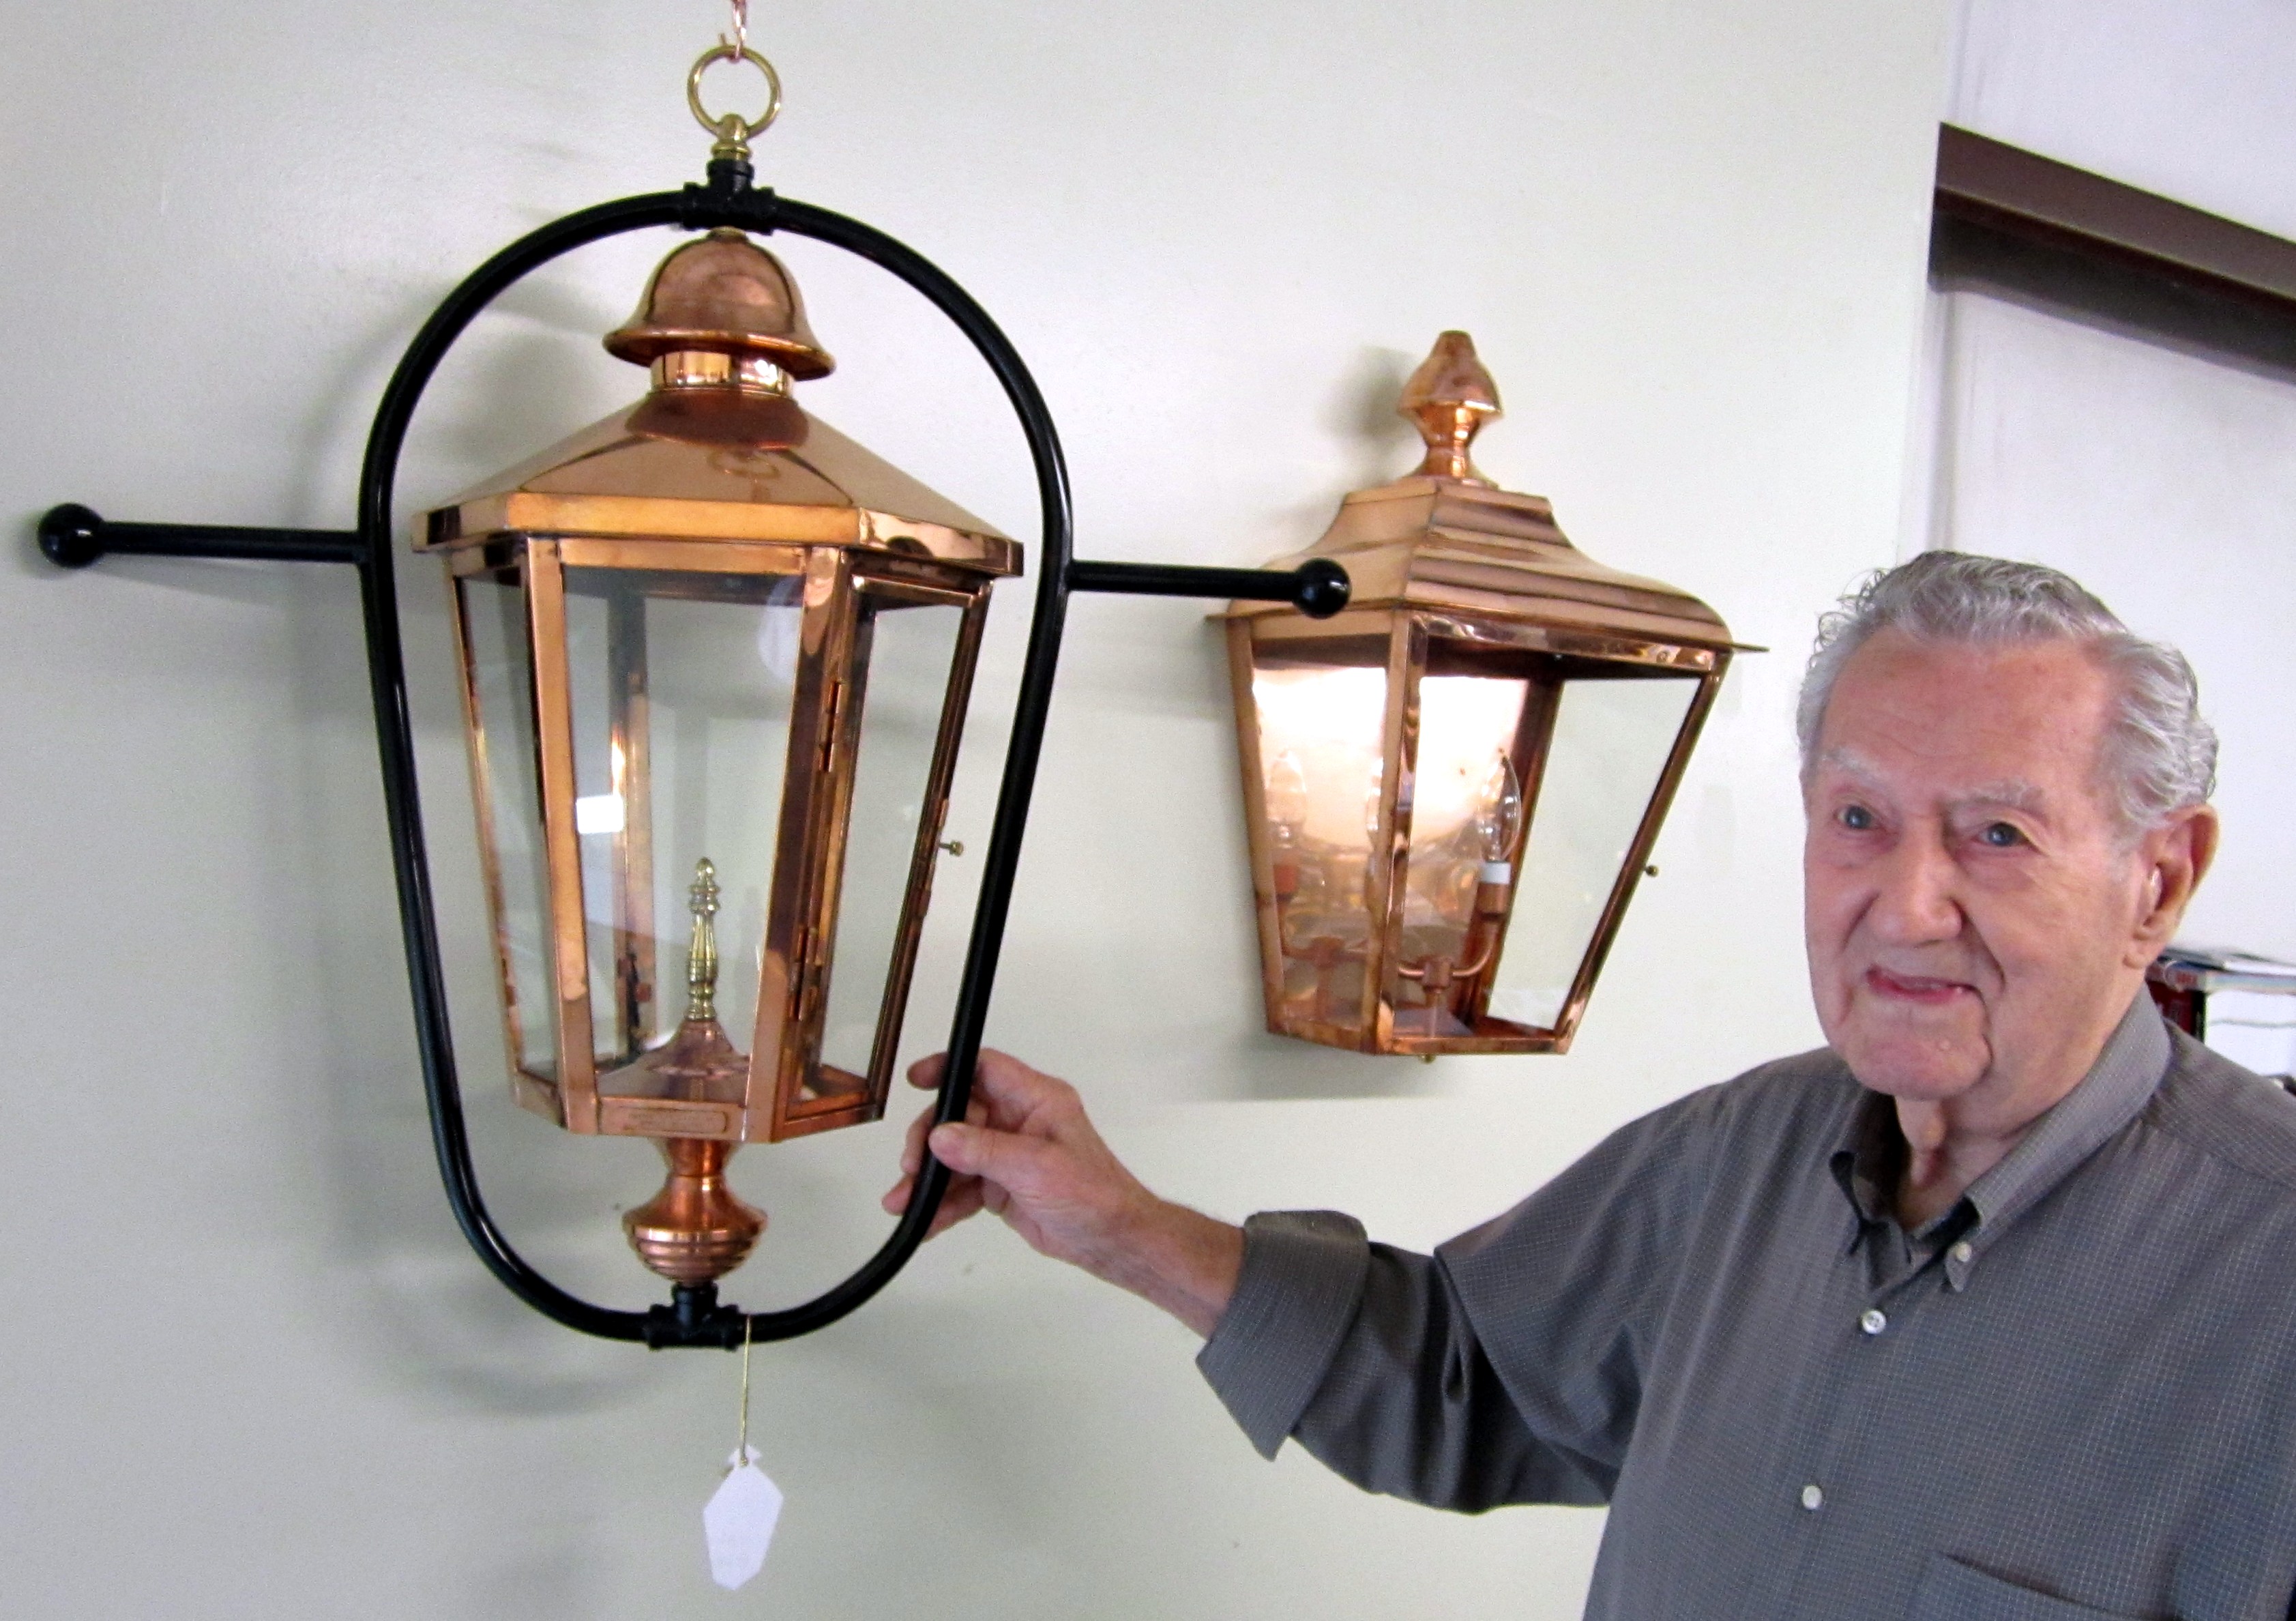 What’s Deal with Coppersmith Lighting? - Shop Pretty